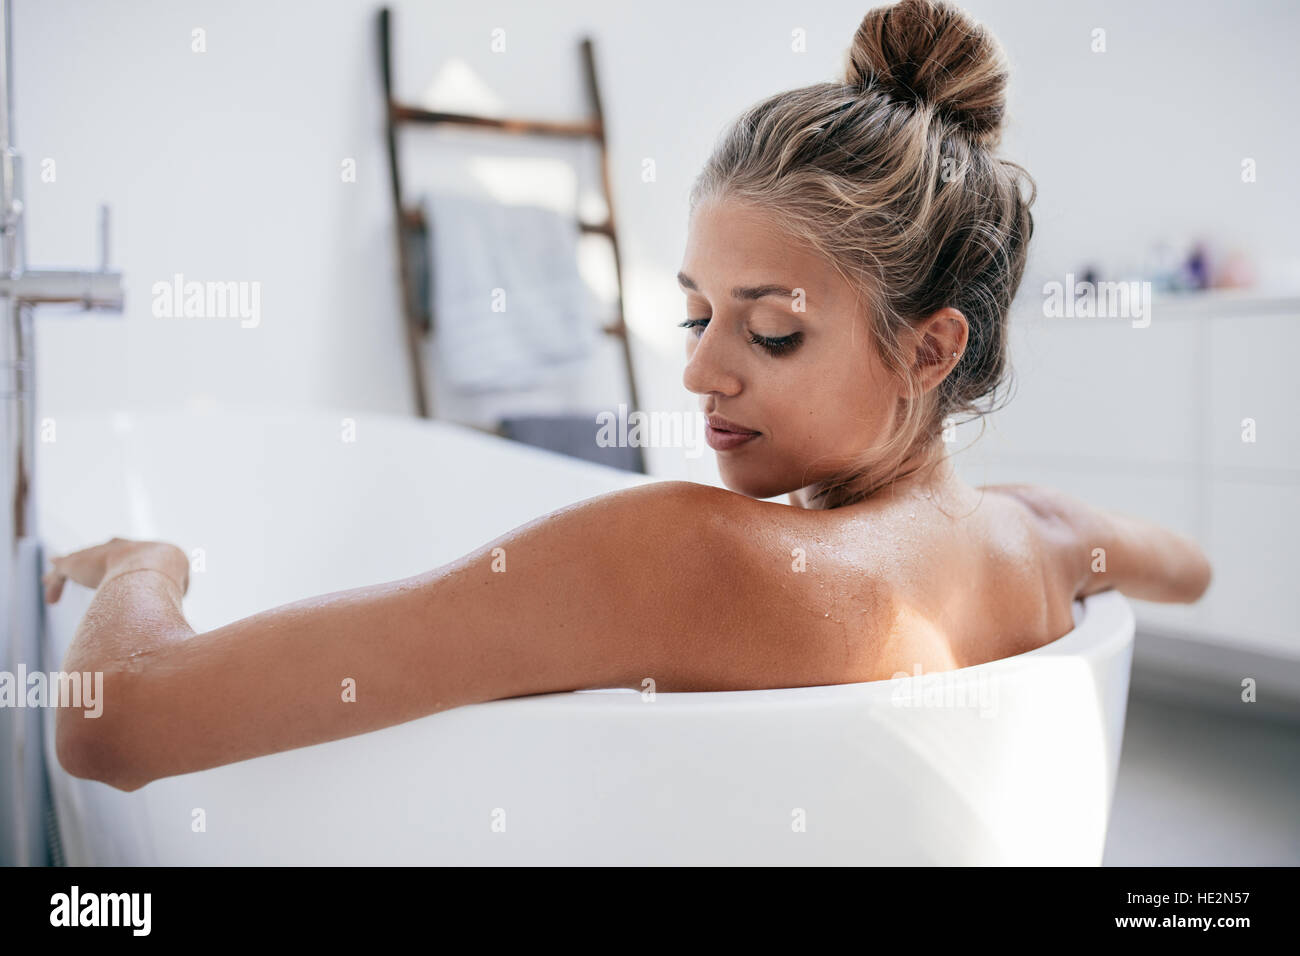 Close up shot of young woman in bathtub. Female taking bath in bathroom. Stock Photo